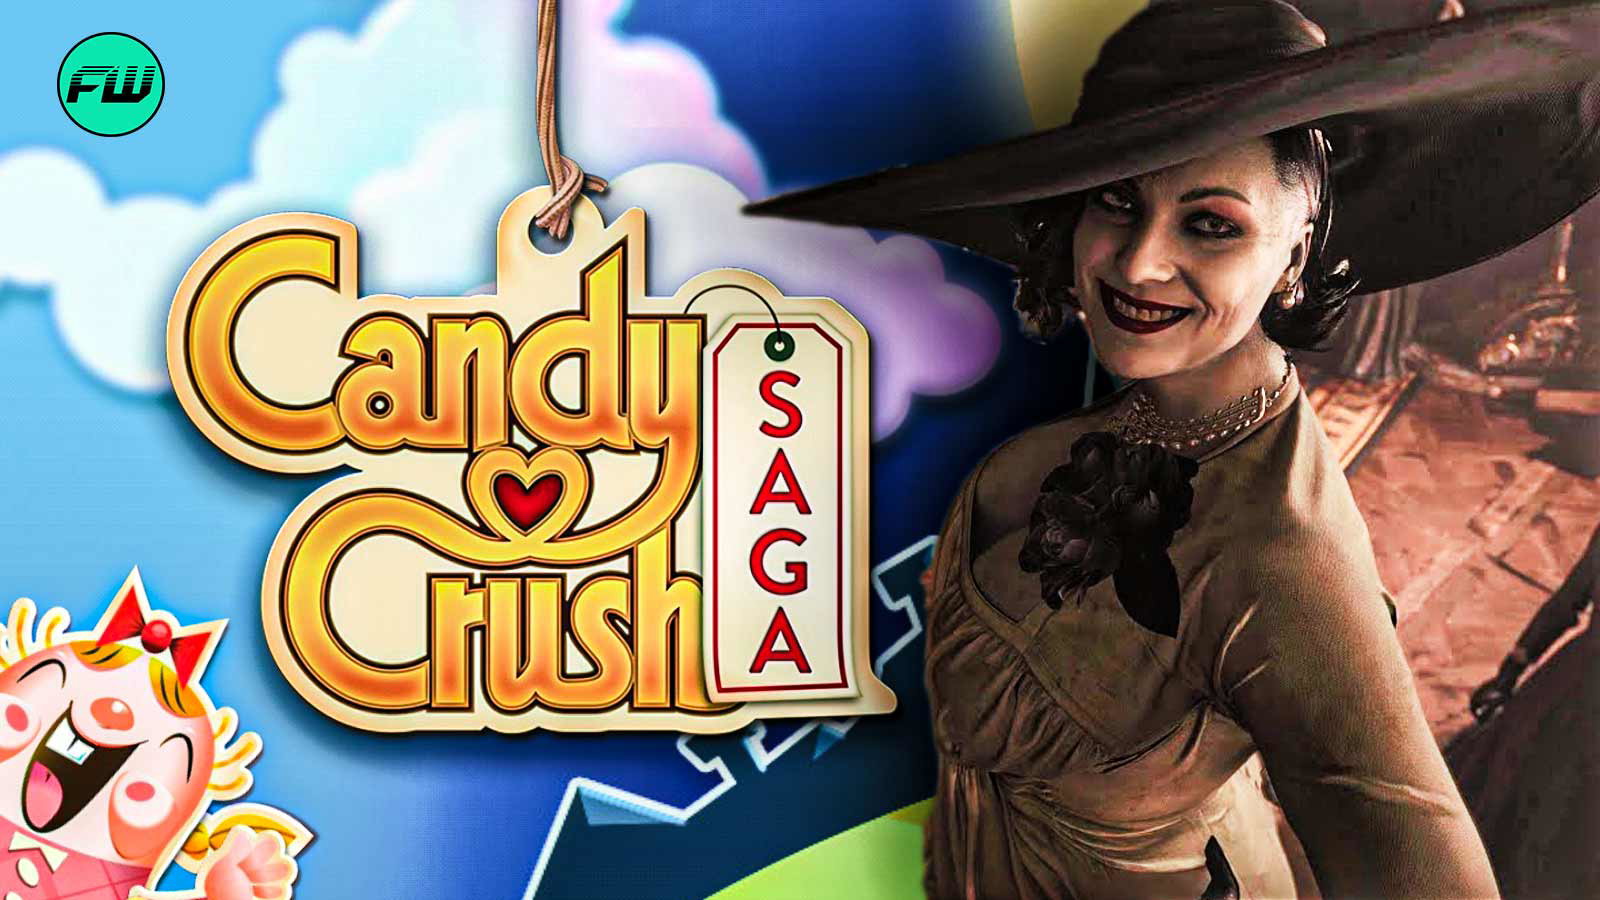 Resident Evil and Candy Crush